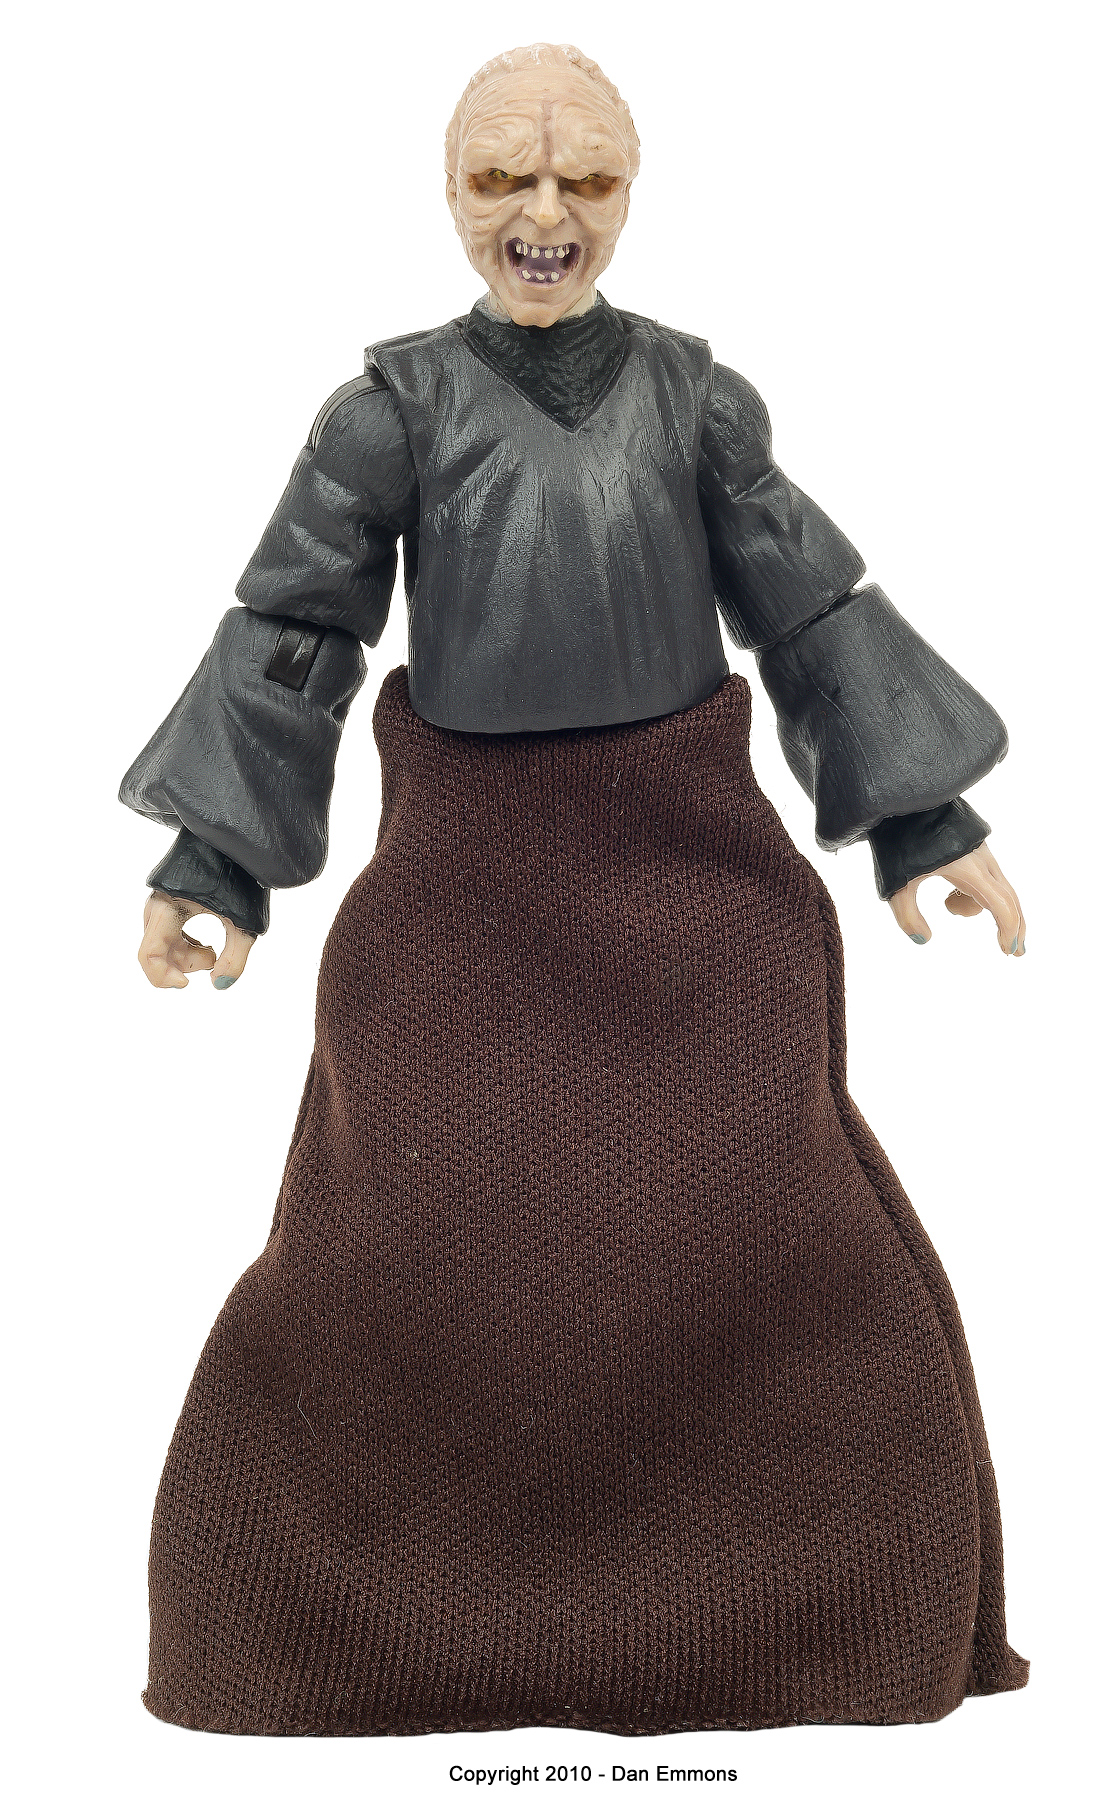 The Vintage Collection - VC12: Darth Sidious